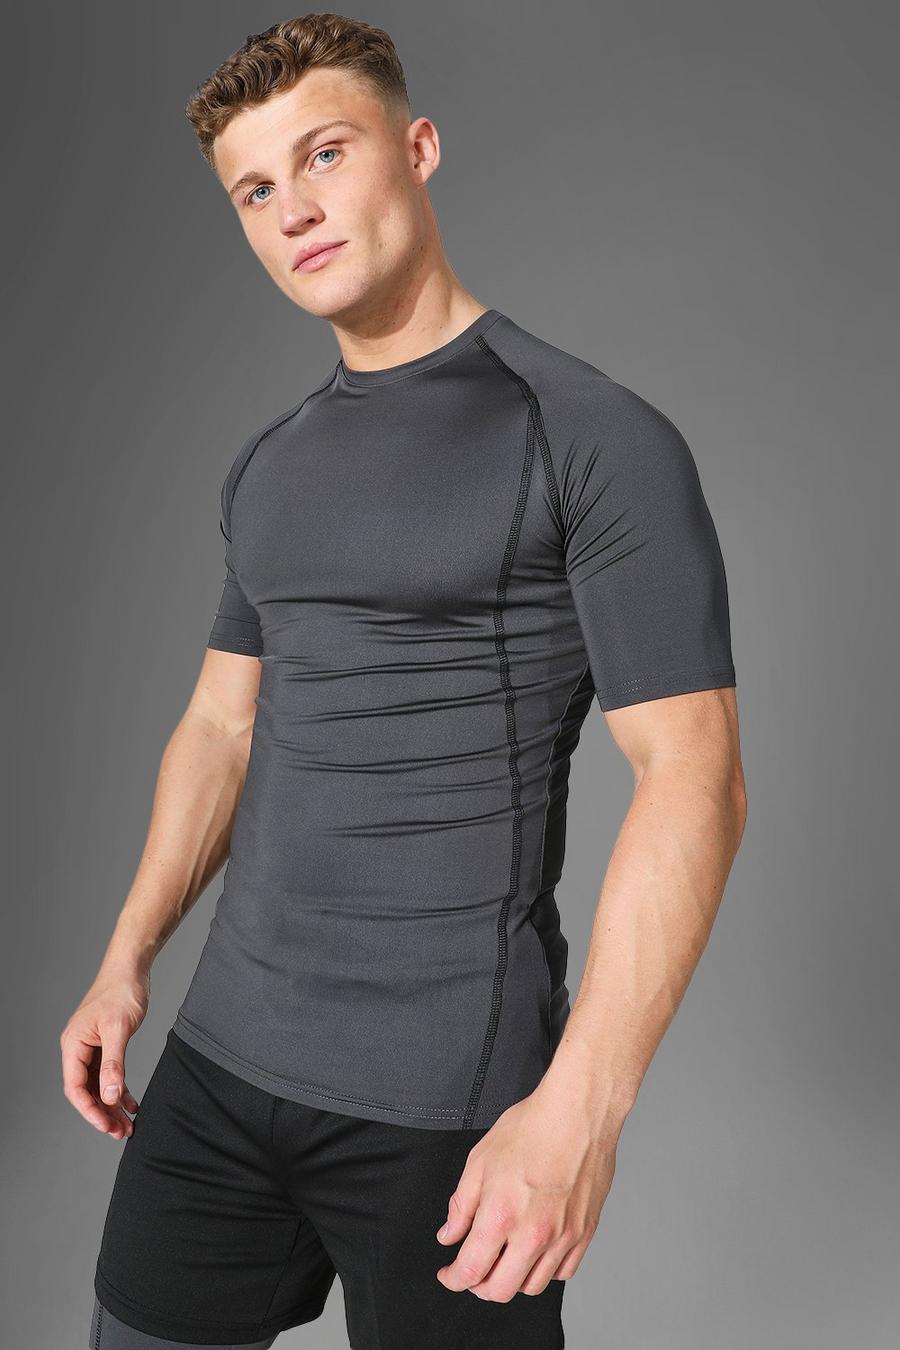 T-shirt Man Active Gym a compressione, Charcoal grigio image number 1